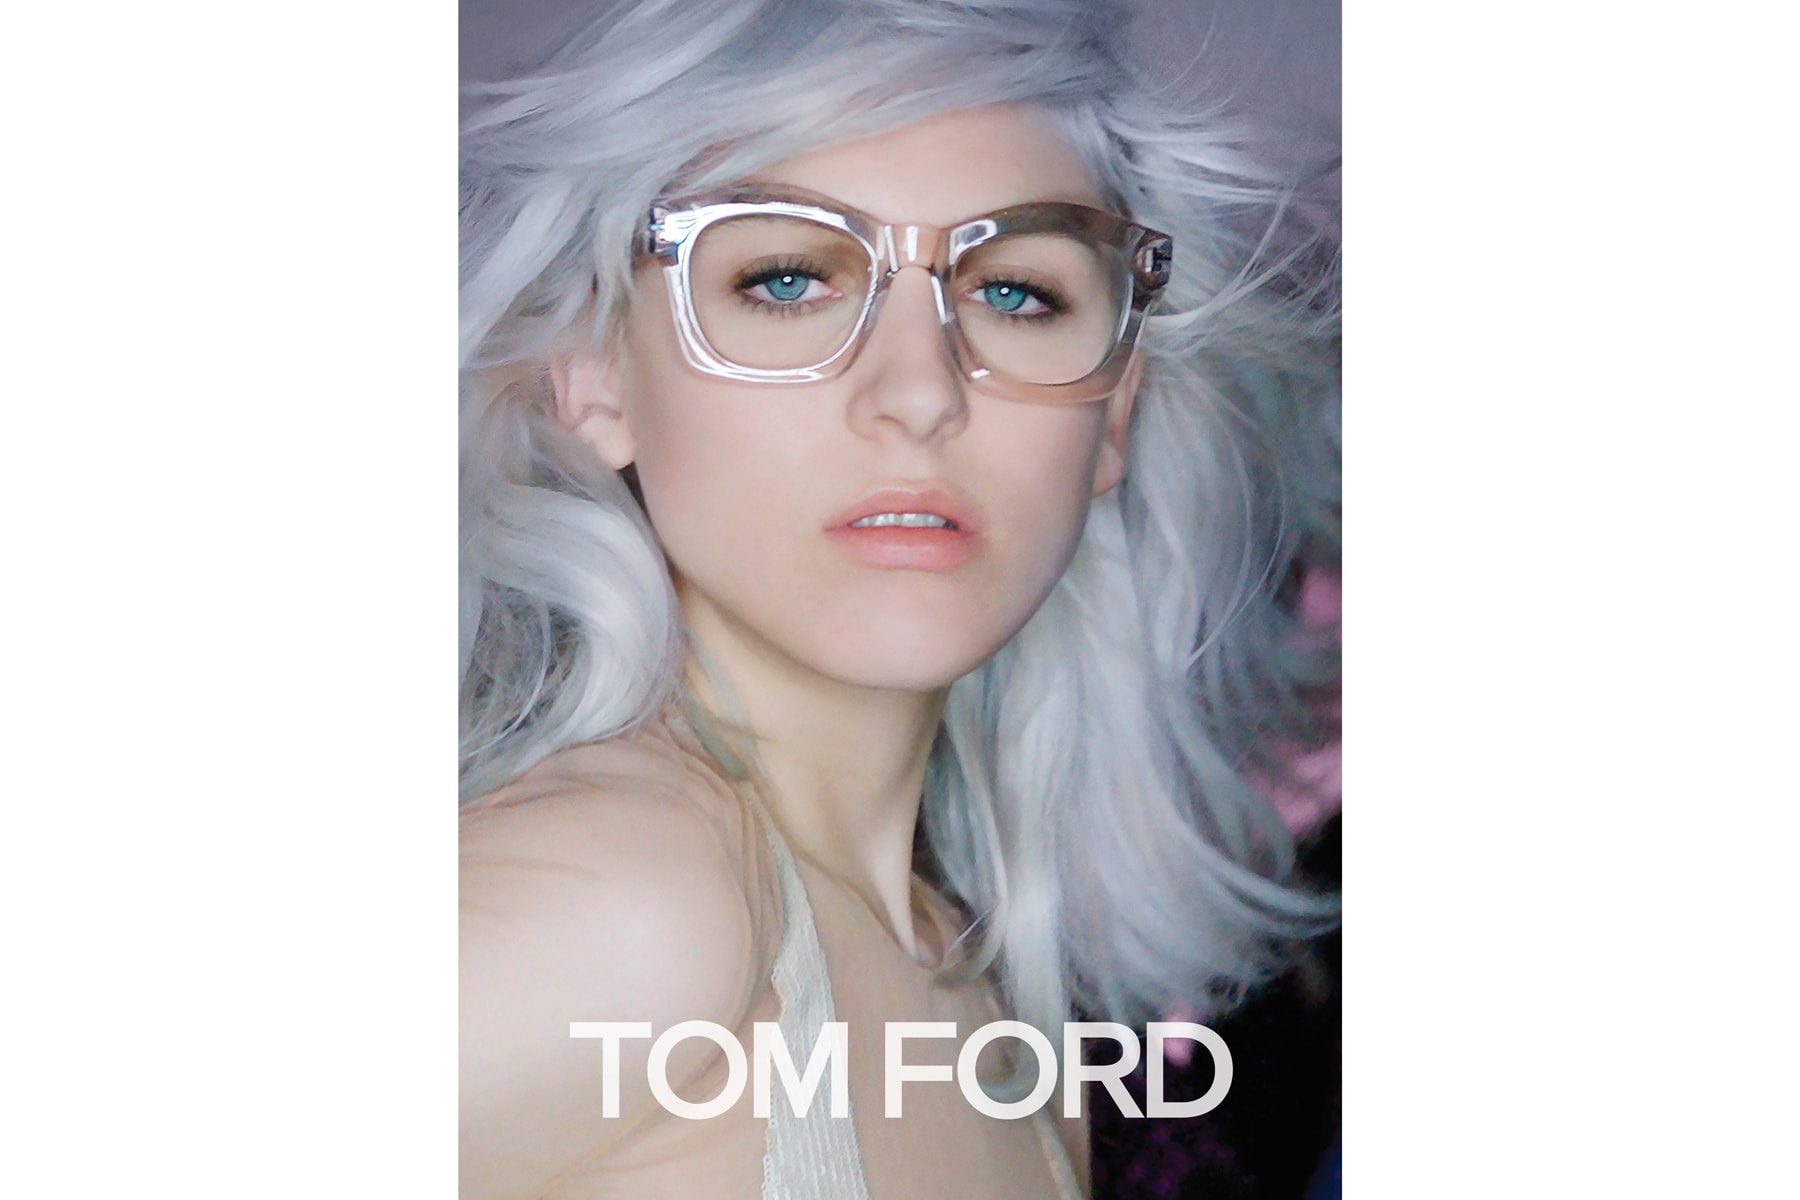 Tom Ford Spring Campaign Shot By Nick Knight | Hypebeast